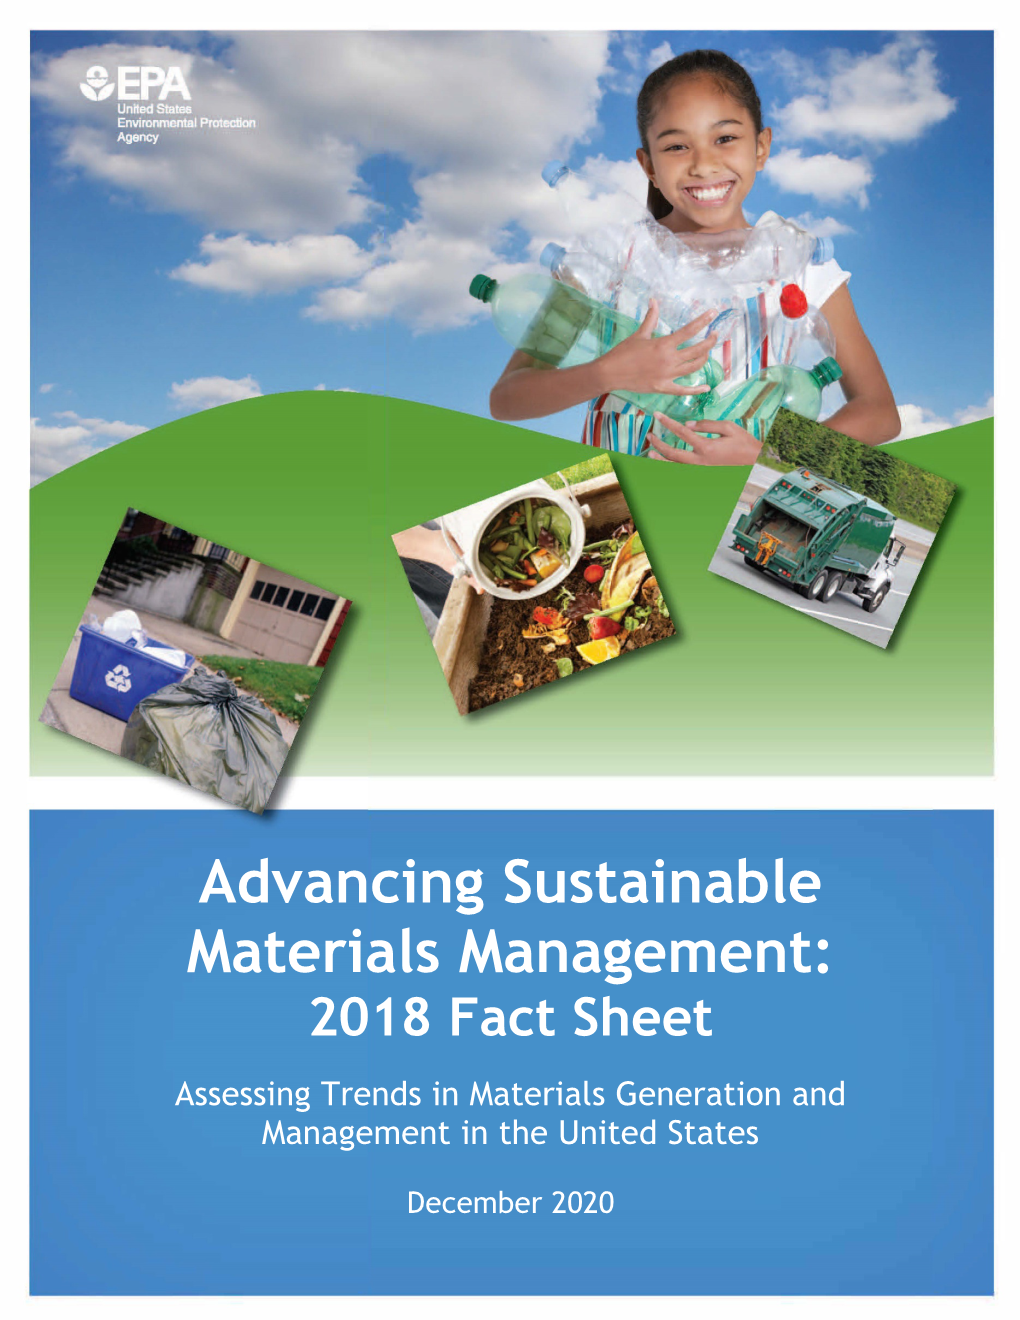 Advancing Sustainable Materials Management: 2018 Fact Sheet Assessing Trends in Materials Generation and Management in the United States